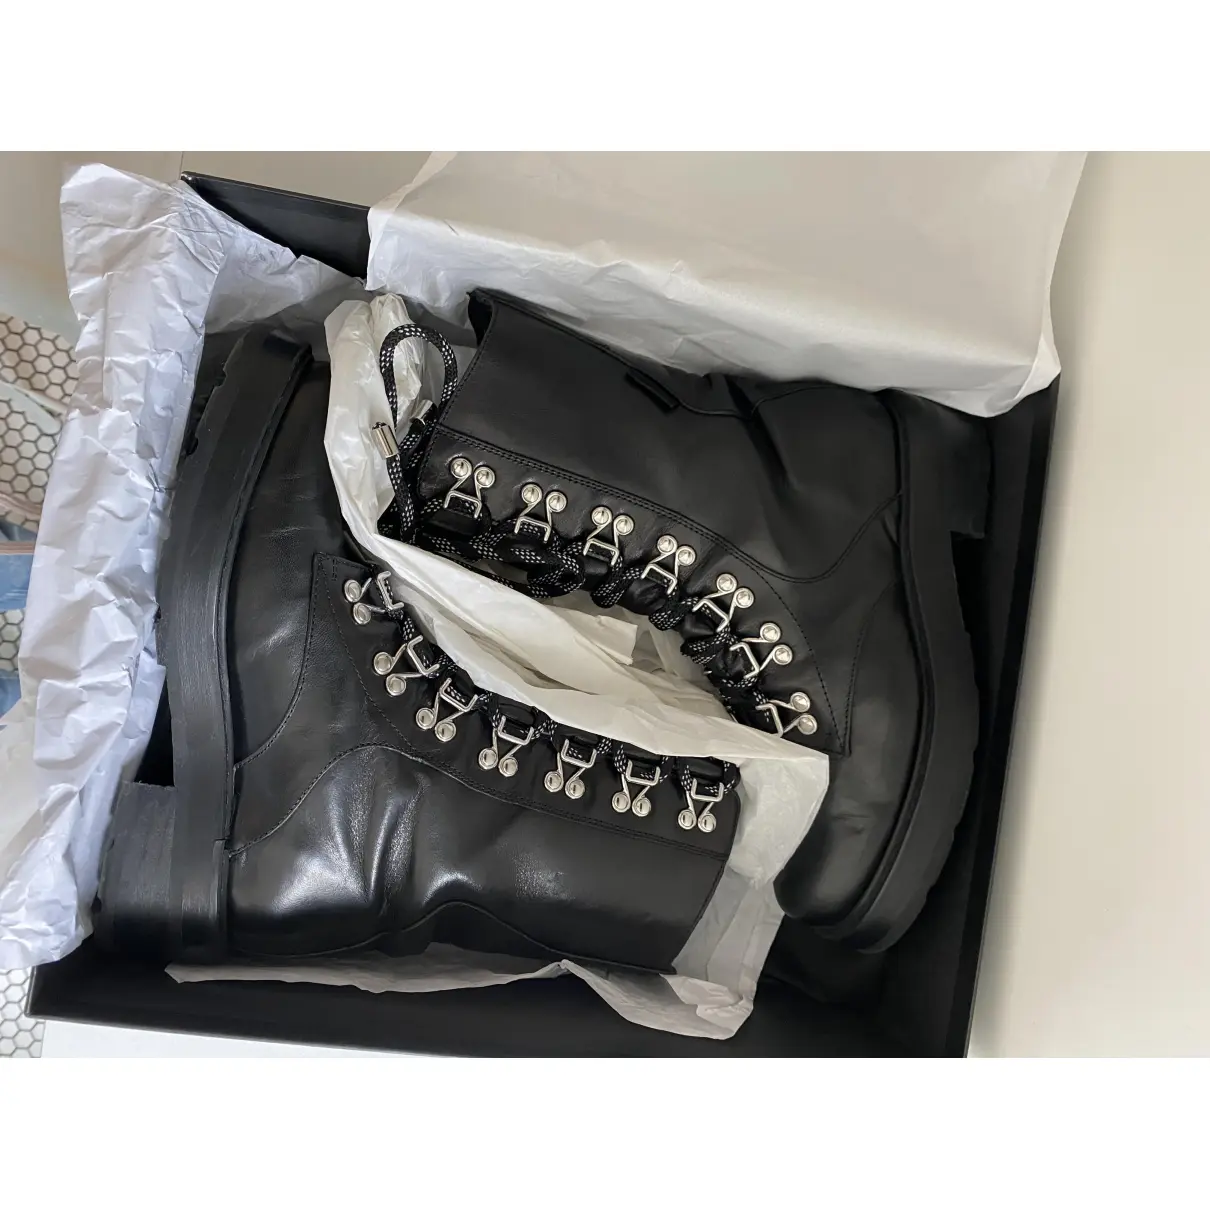 Leather lace up boots Olivier Theyskens